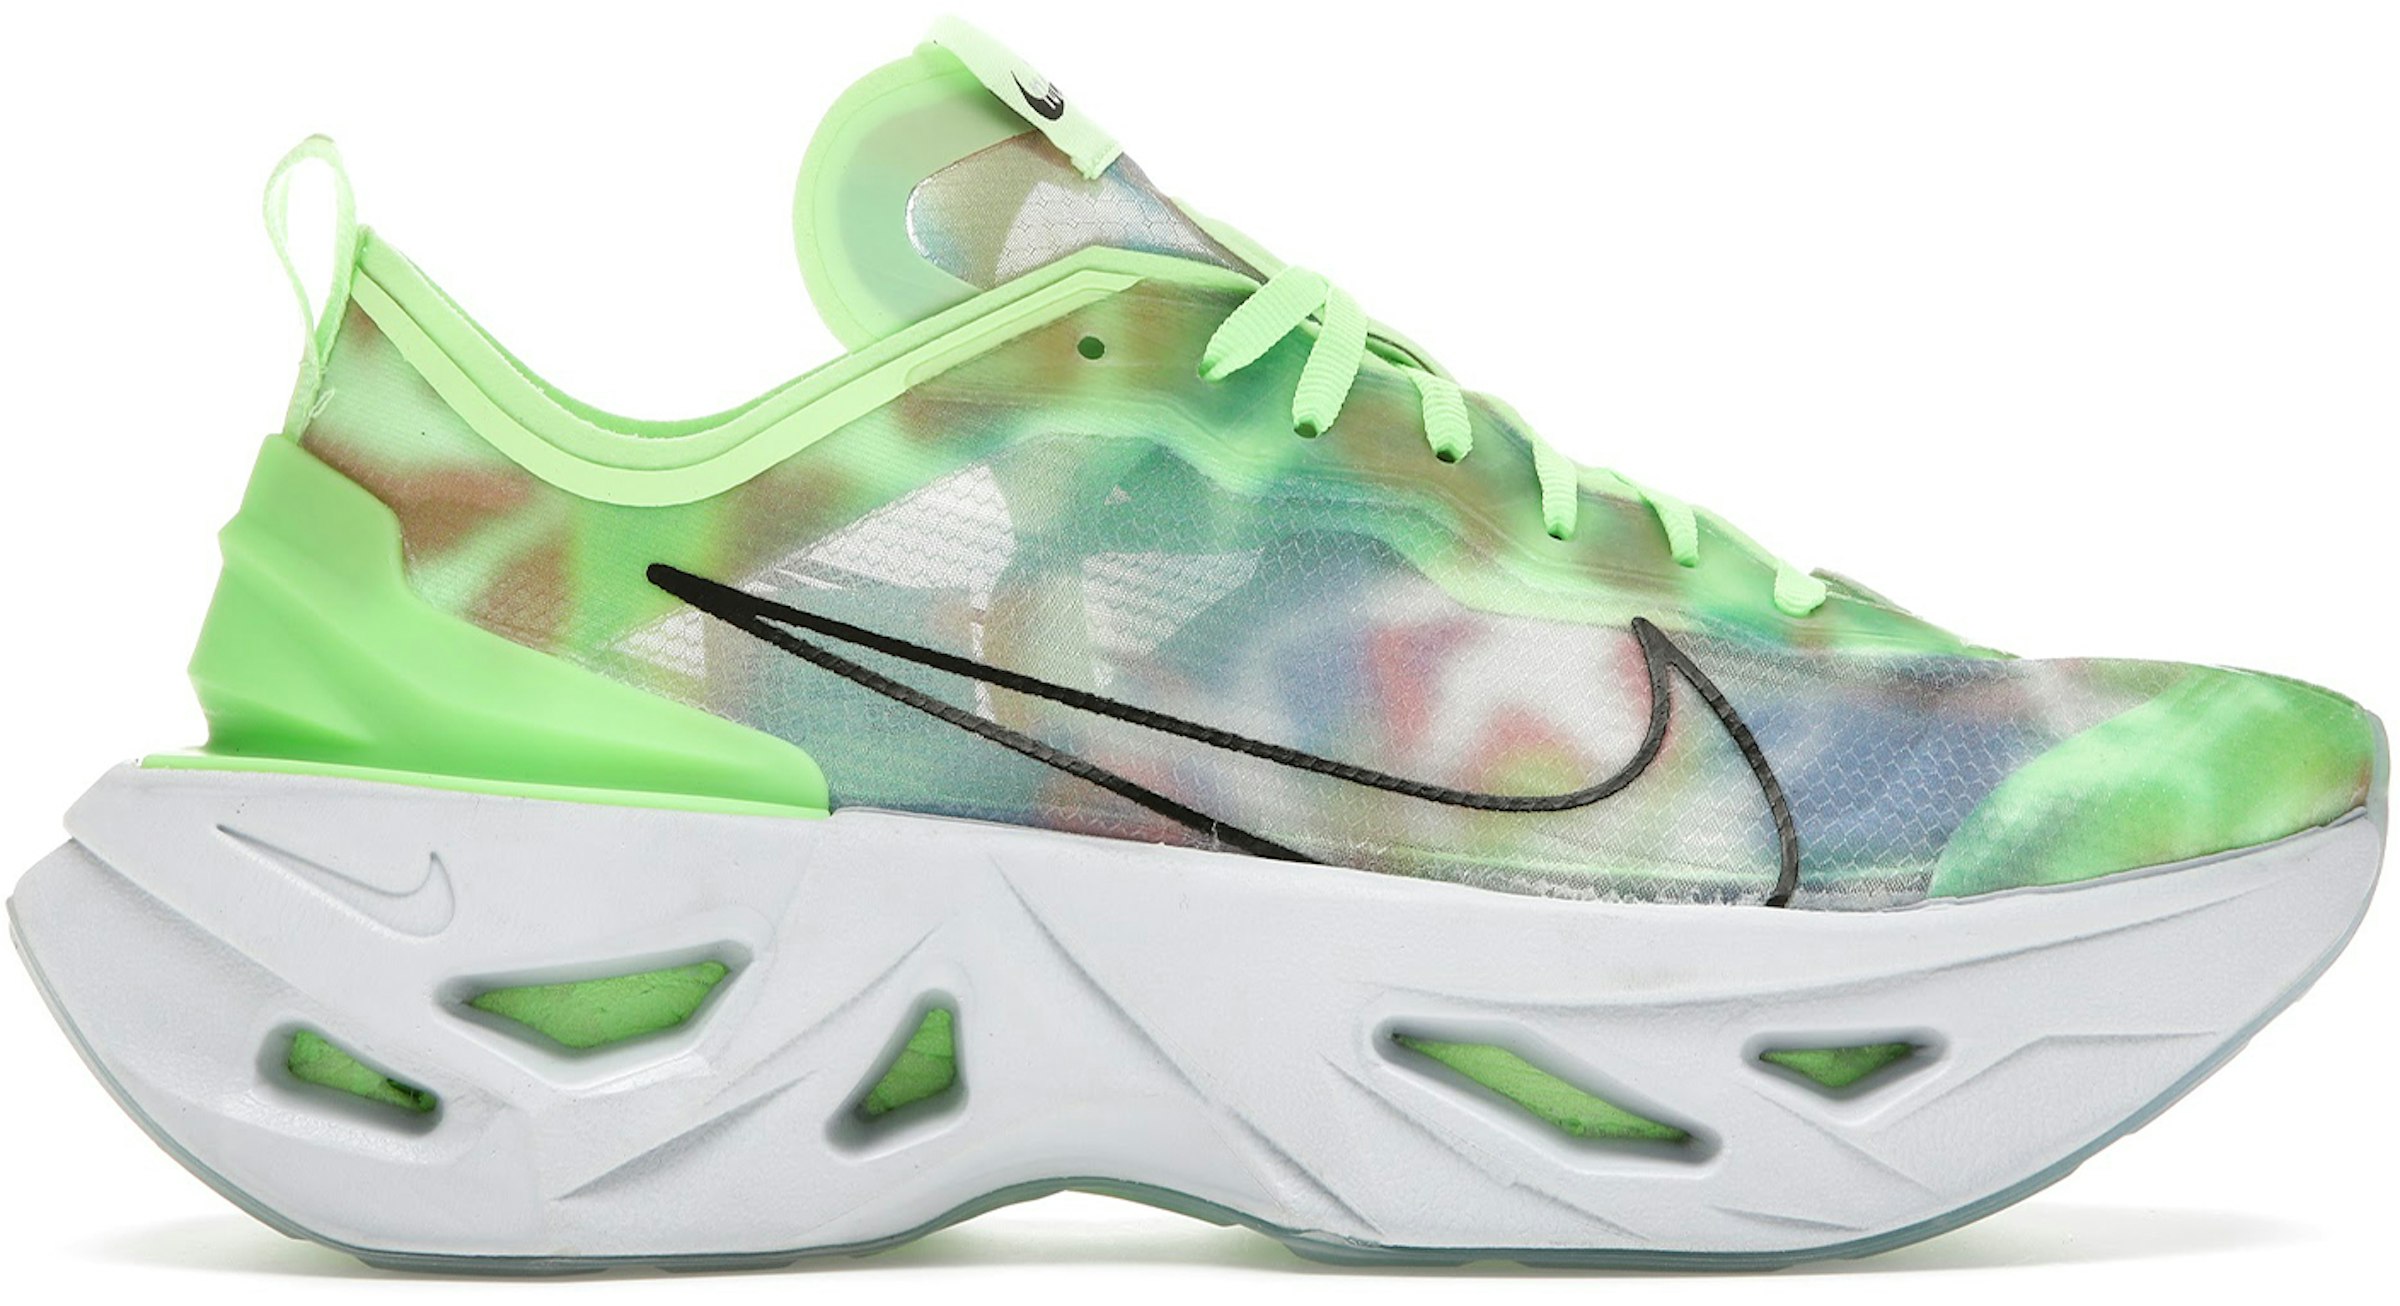 Nike ZoomX Grind Lime (Women's) - CT5770-300 -